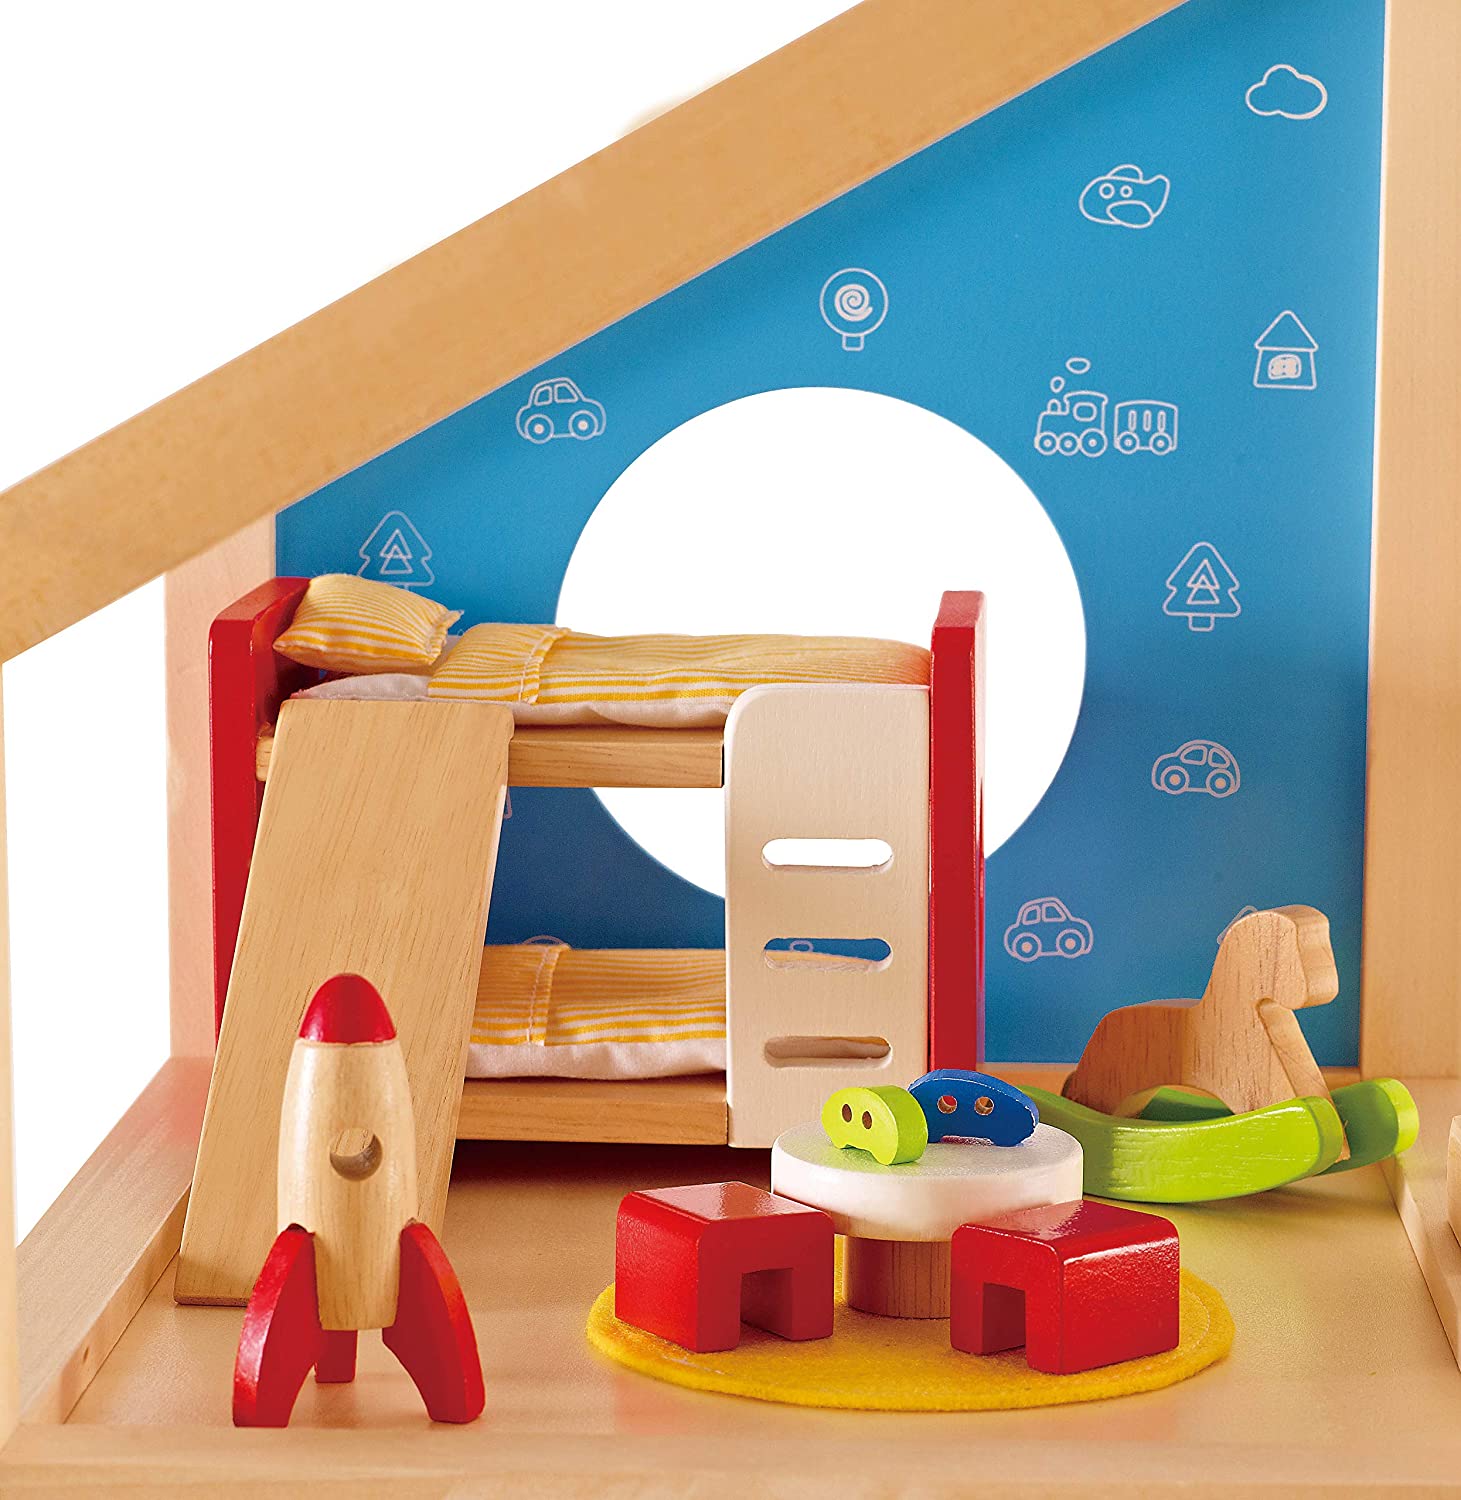 Hape Wooden Doll House Furniture Children's Room with Accessories - Abesons 